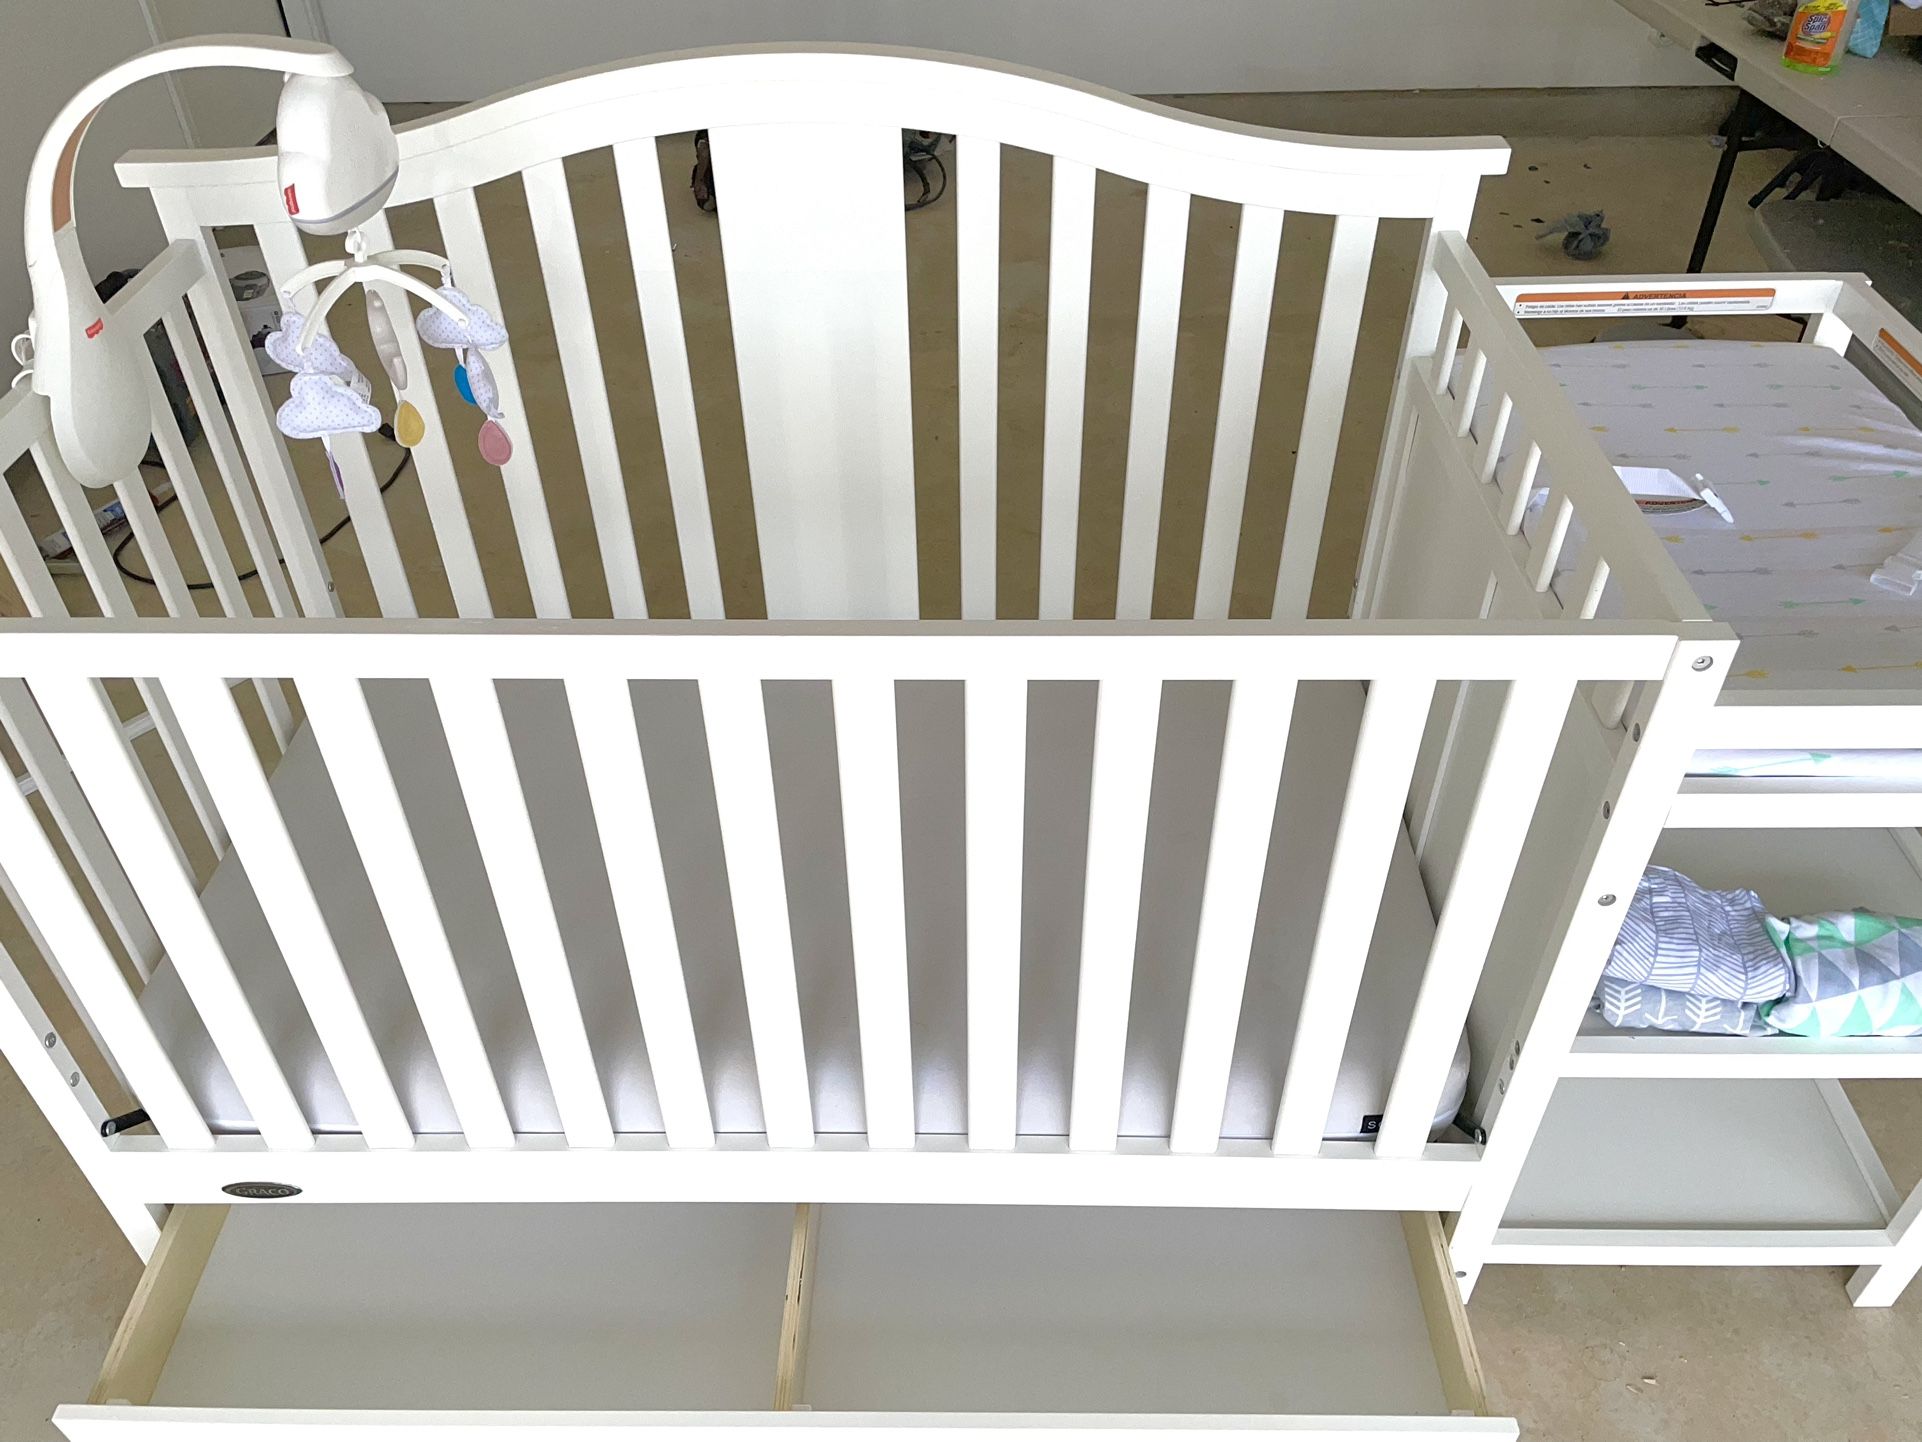 Graco Solano 5-in-1 Convertible Crib and Changer with Drawer (White) – Crib and Changing Table Combo